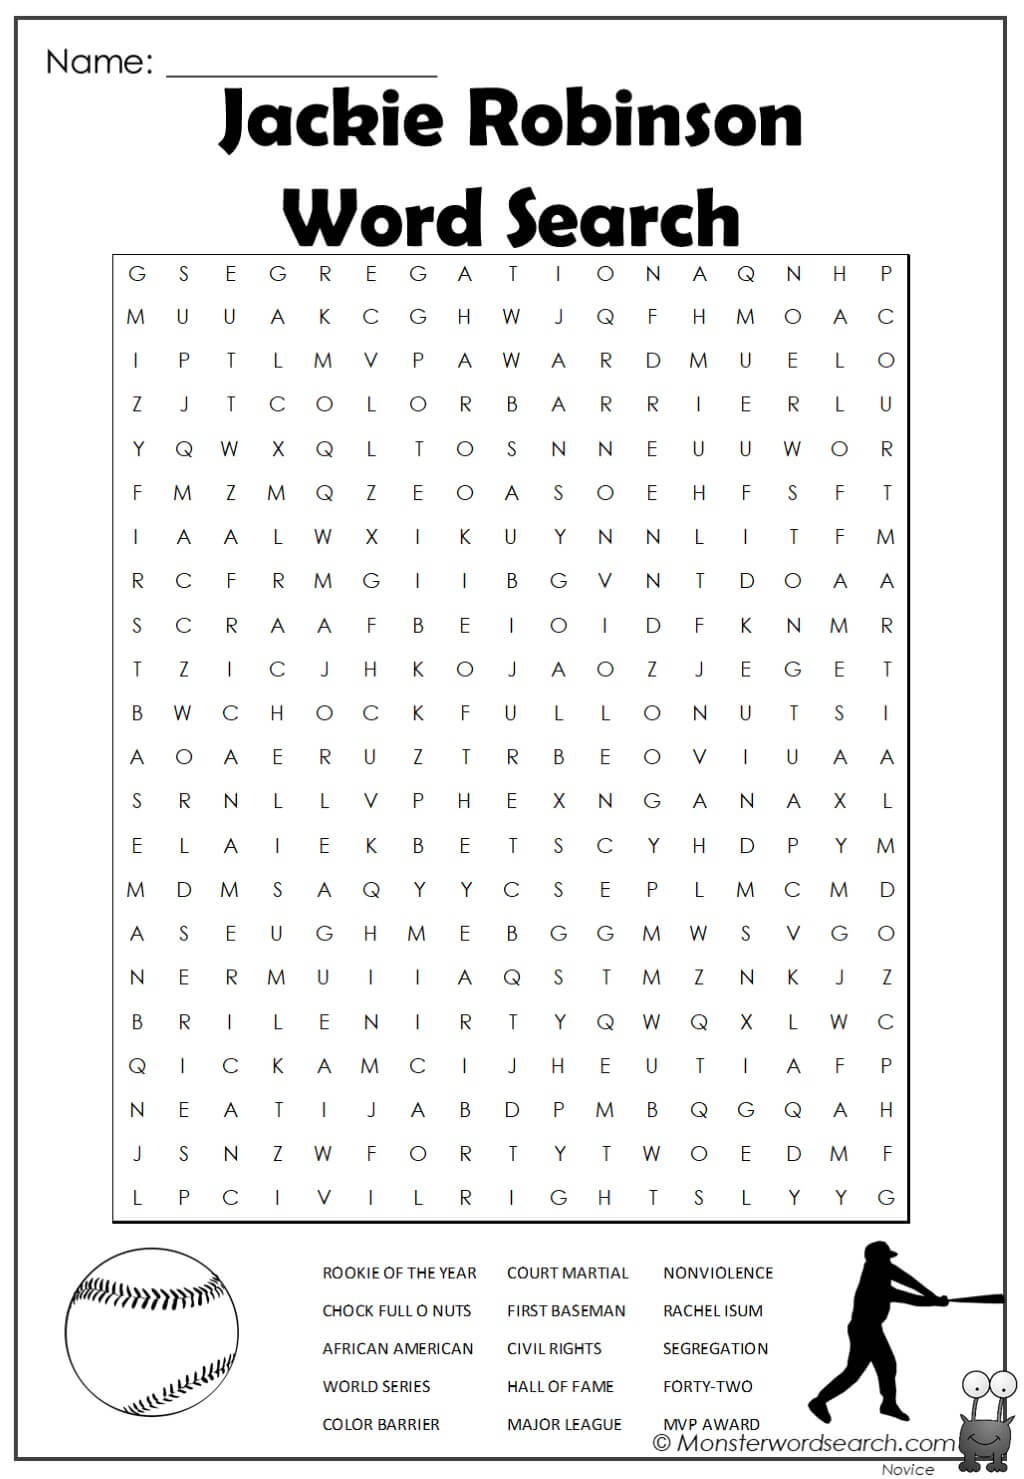 Jackie Robinson Word Search 1 Monster Word Search